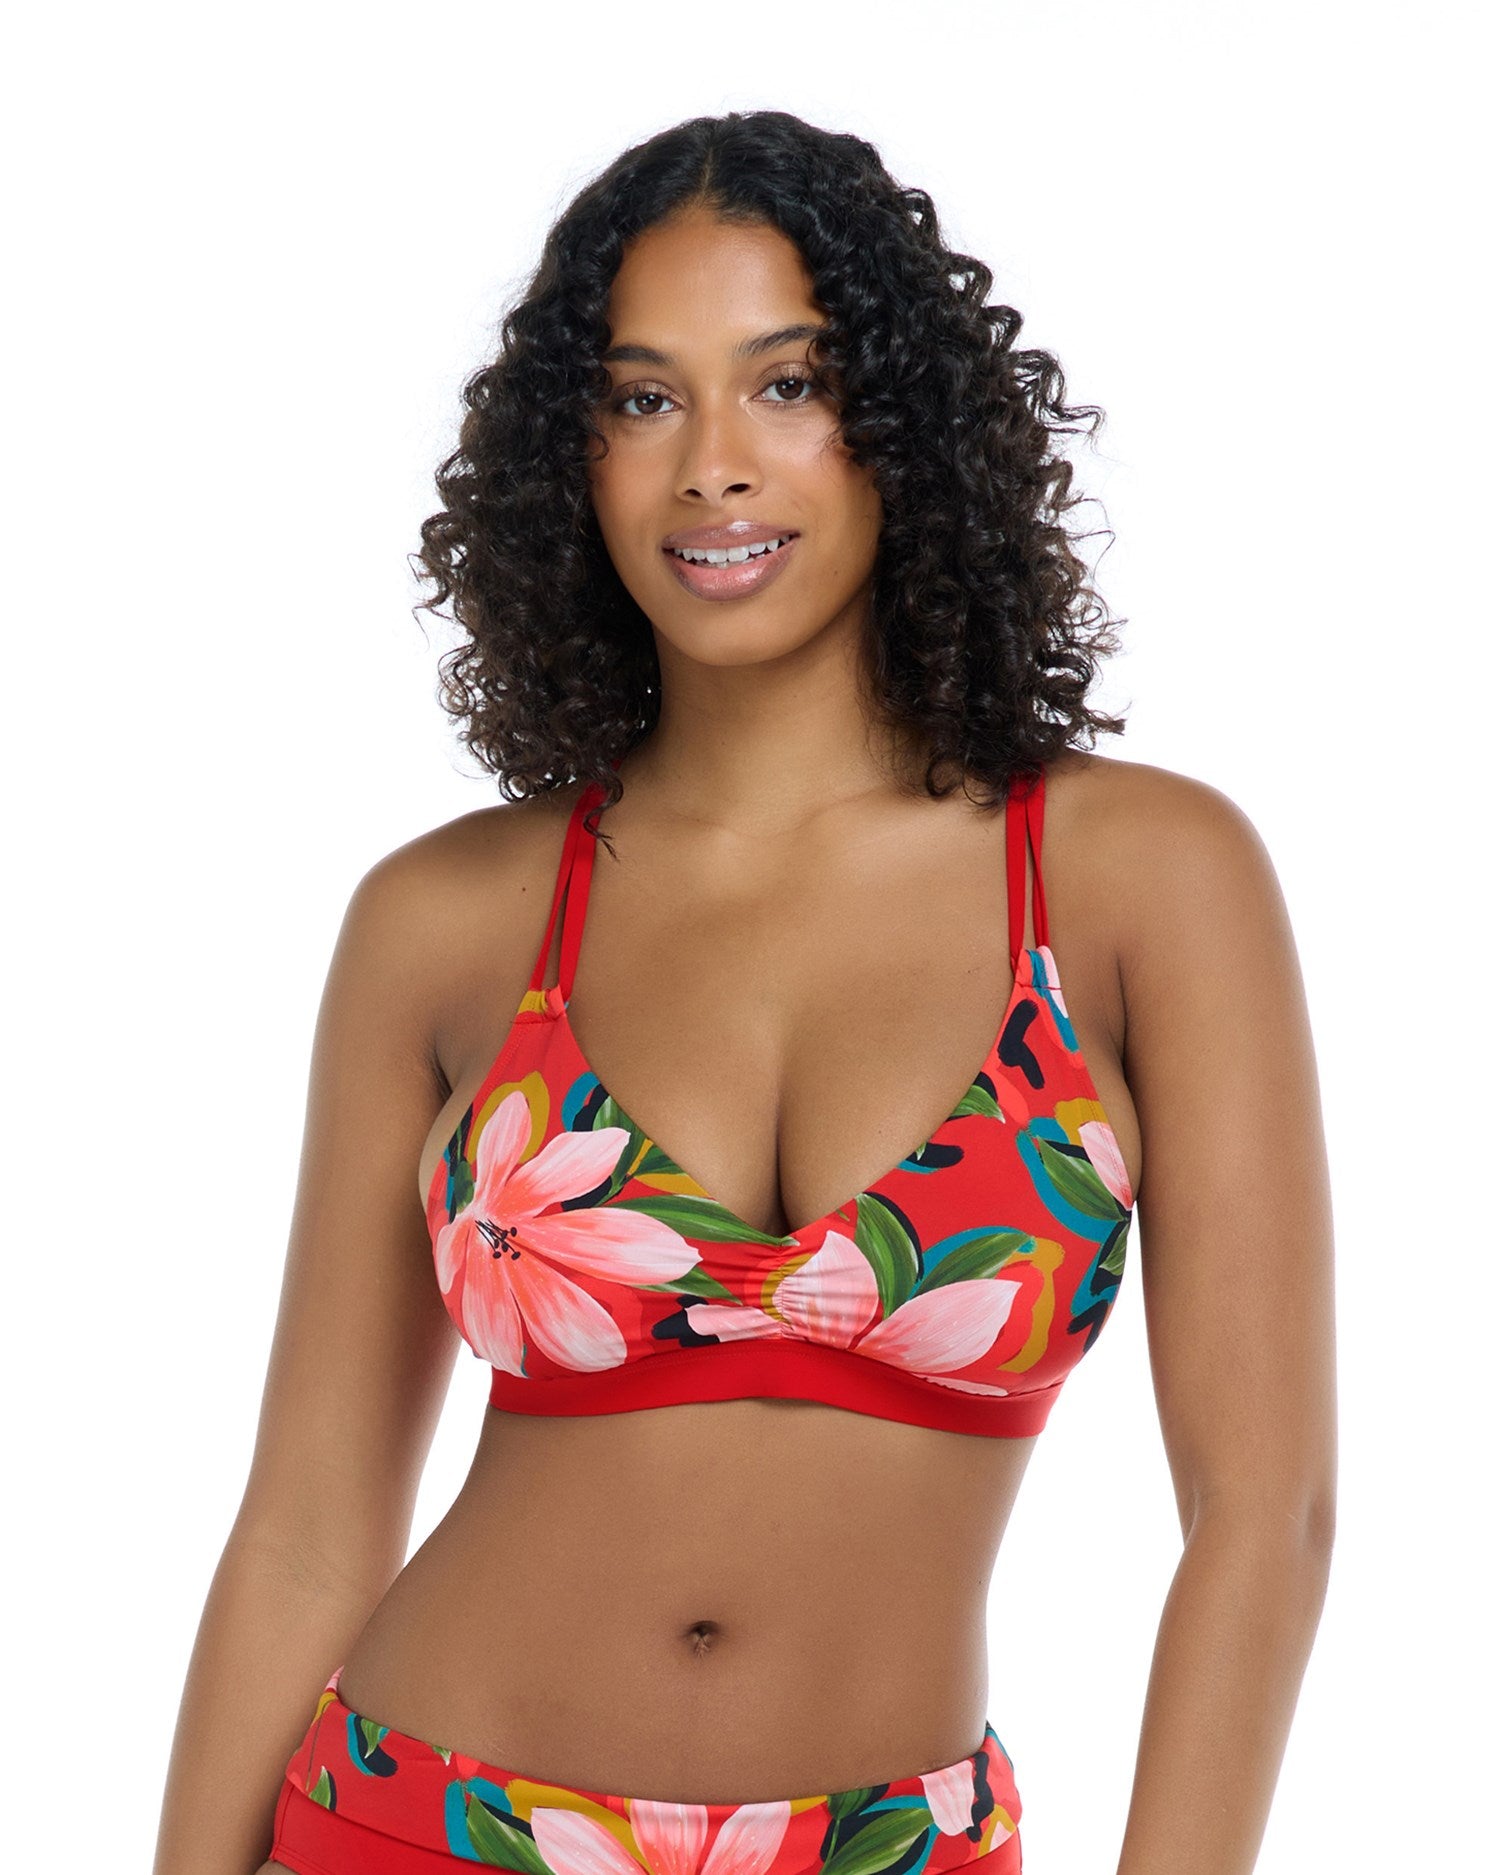 24 Bikinis for Big Boobs That Are Stylish for Cup Sizes from D-M